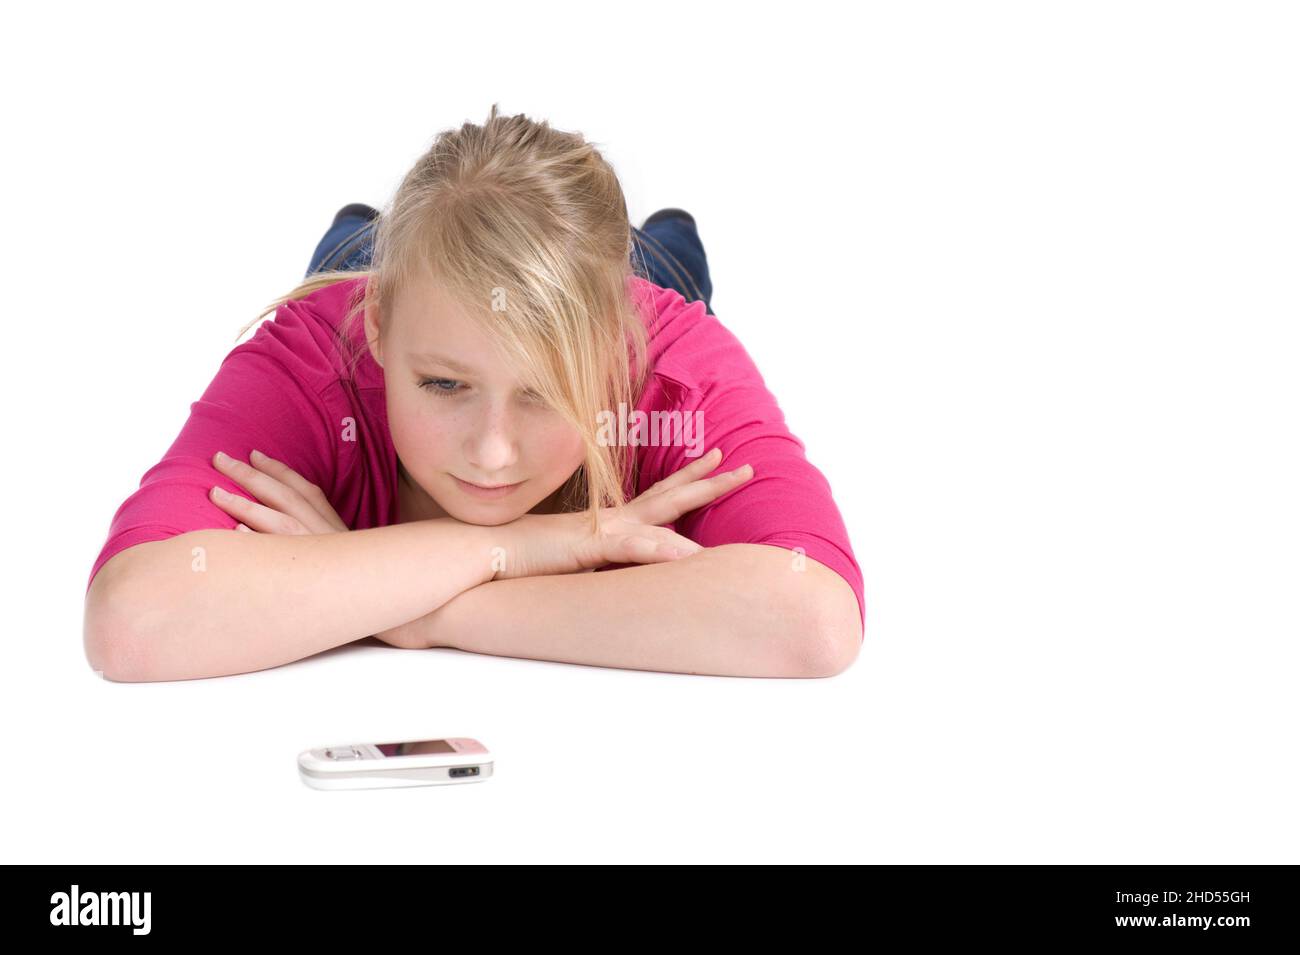 Teenage girl lying down and waiting for a call. Studio shot on white background. Stock Photo